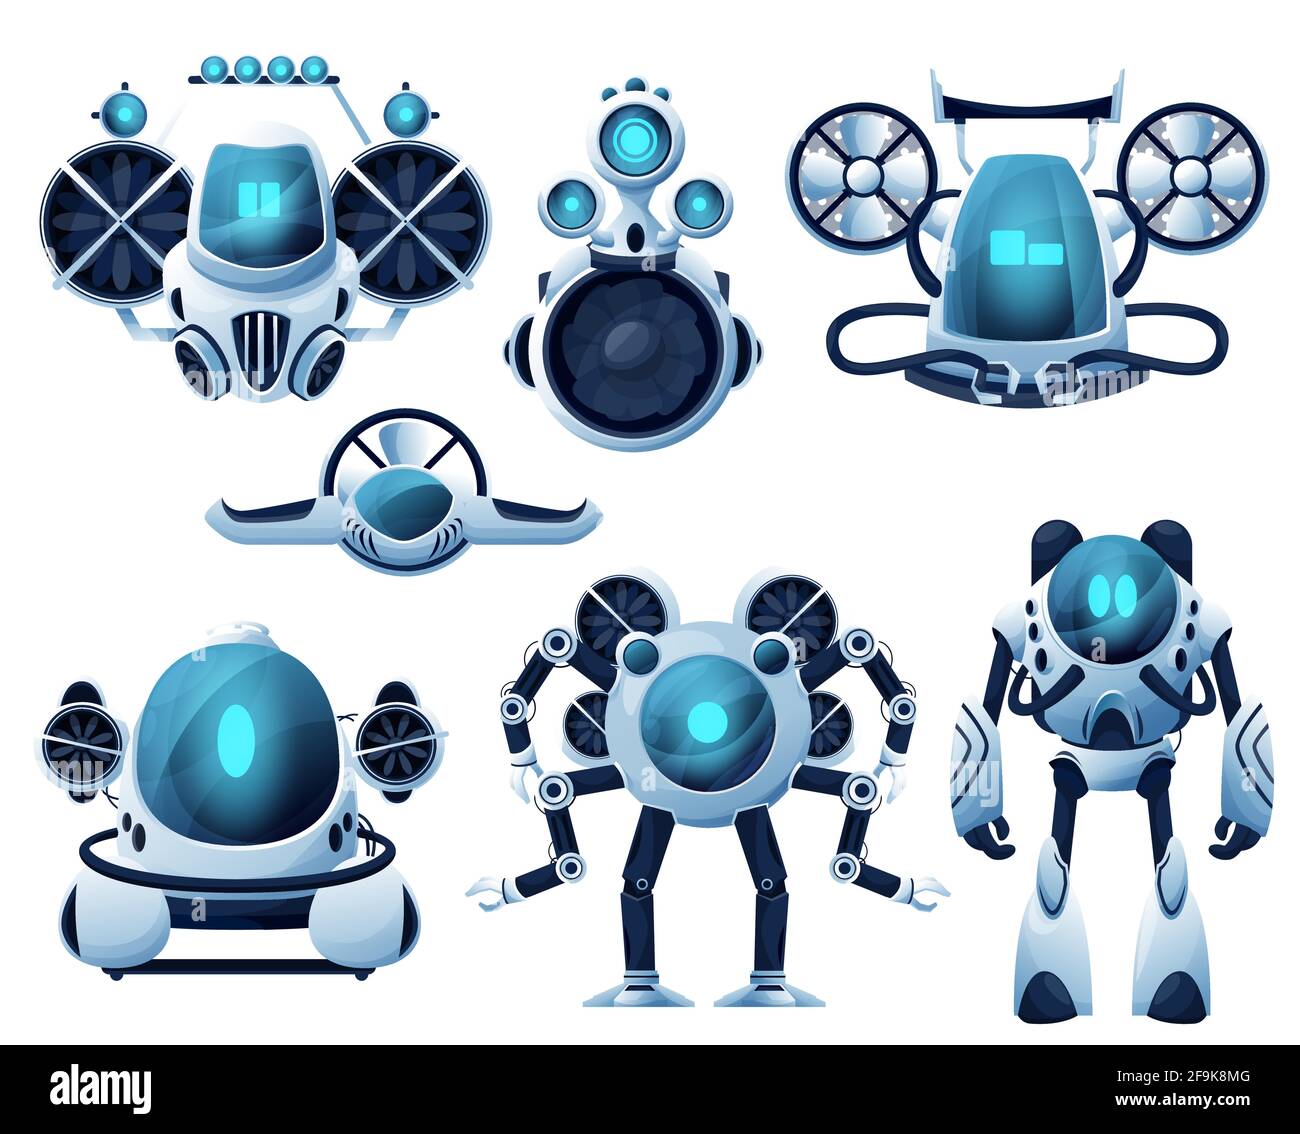 Underwater robot and ROV cartoon characters. Vector robot bathyscaphe and submarine, autonomous and unmanned underwater vehicles with manipulator arms Stock Vector